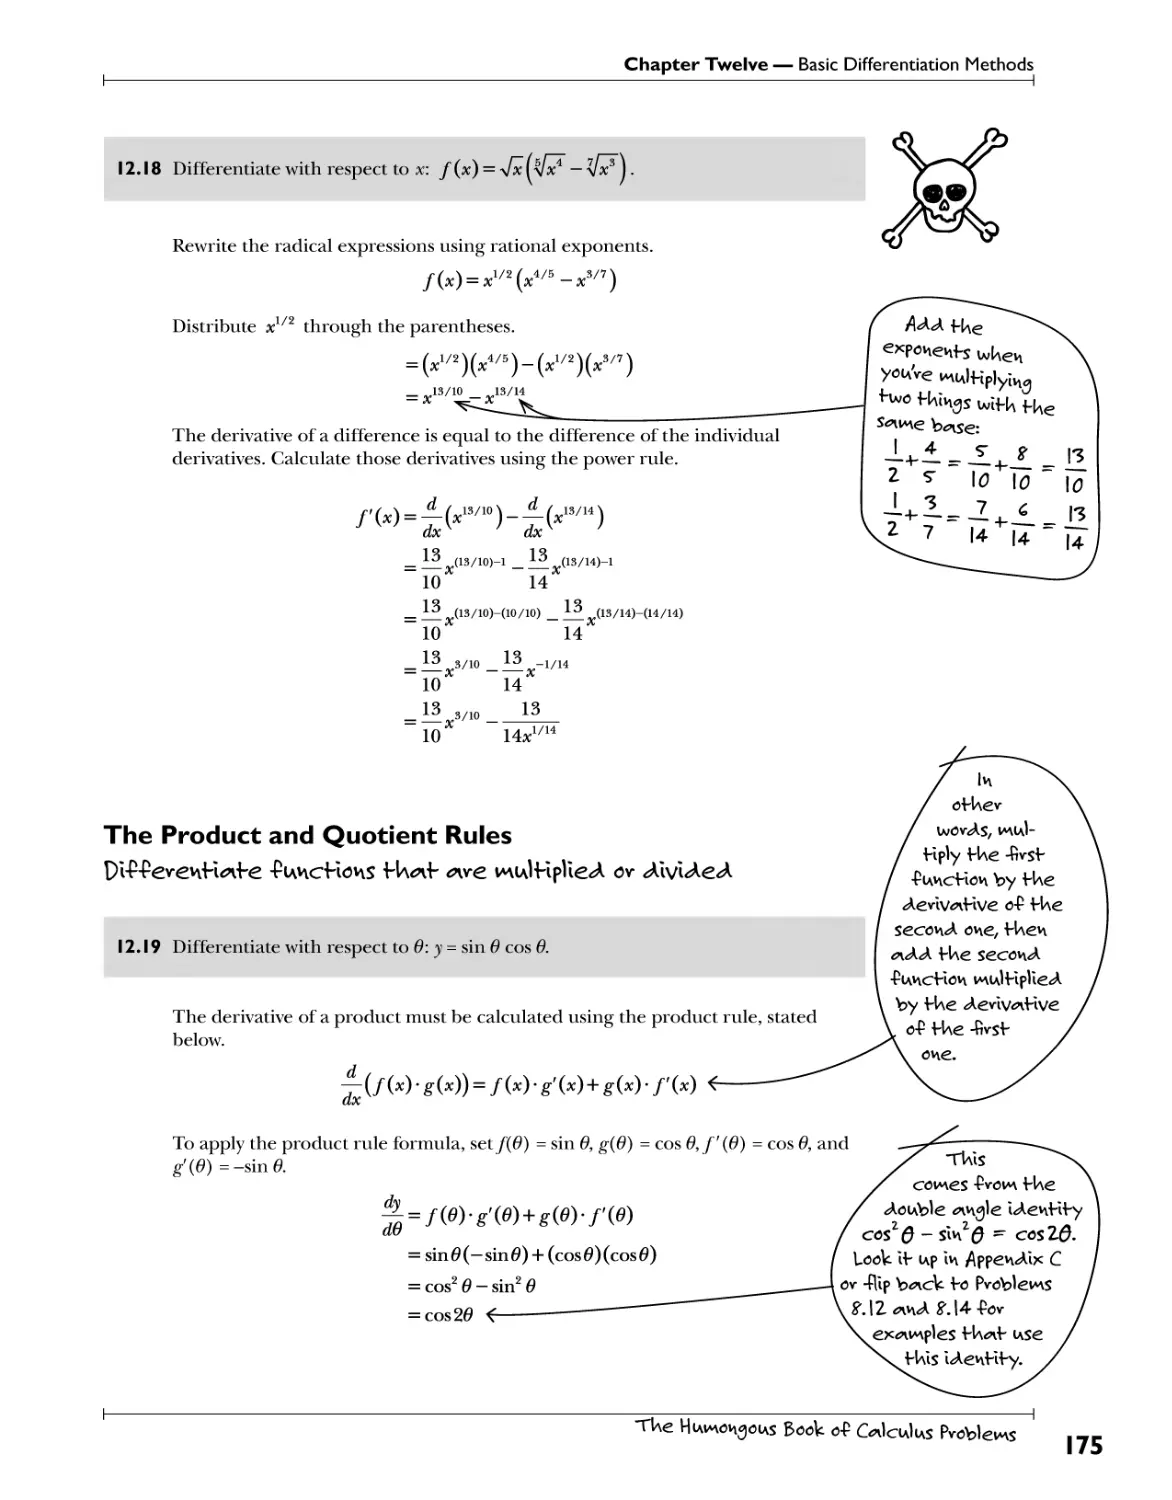 The Product and Quotient Rules 175